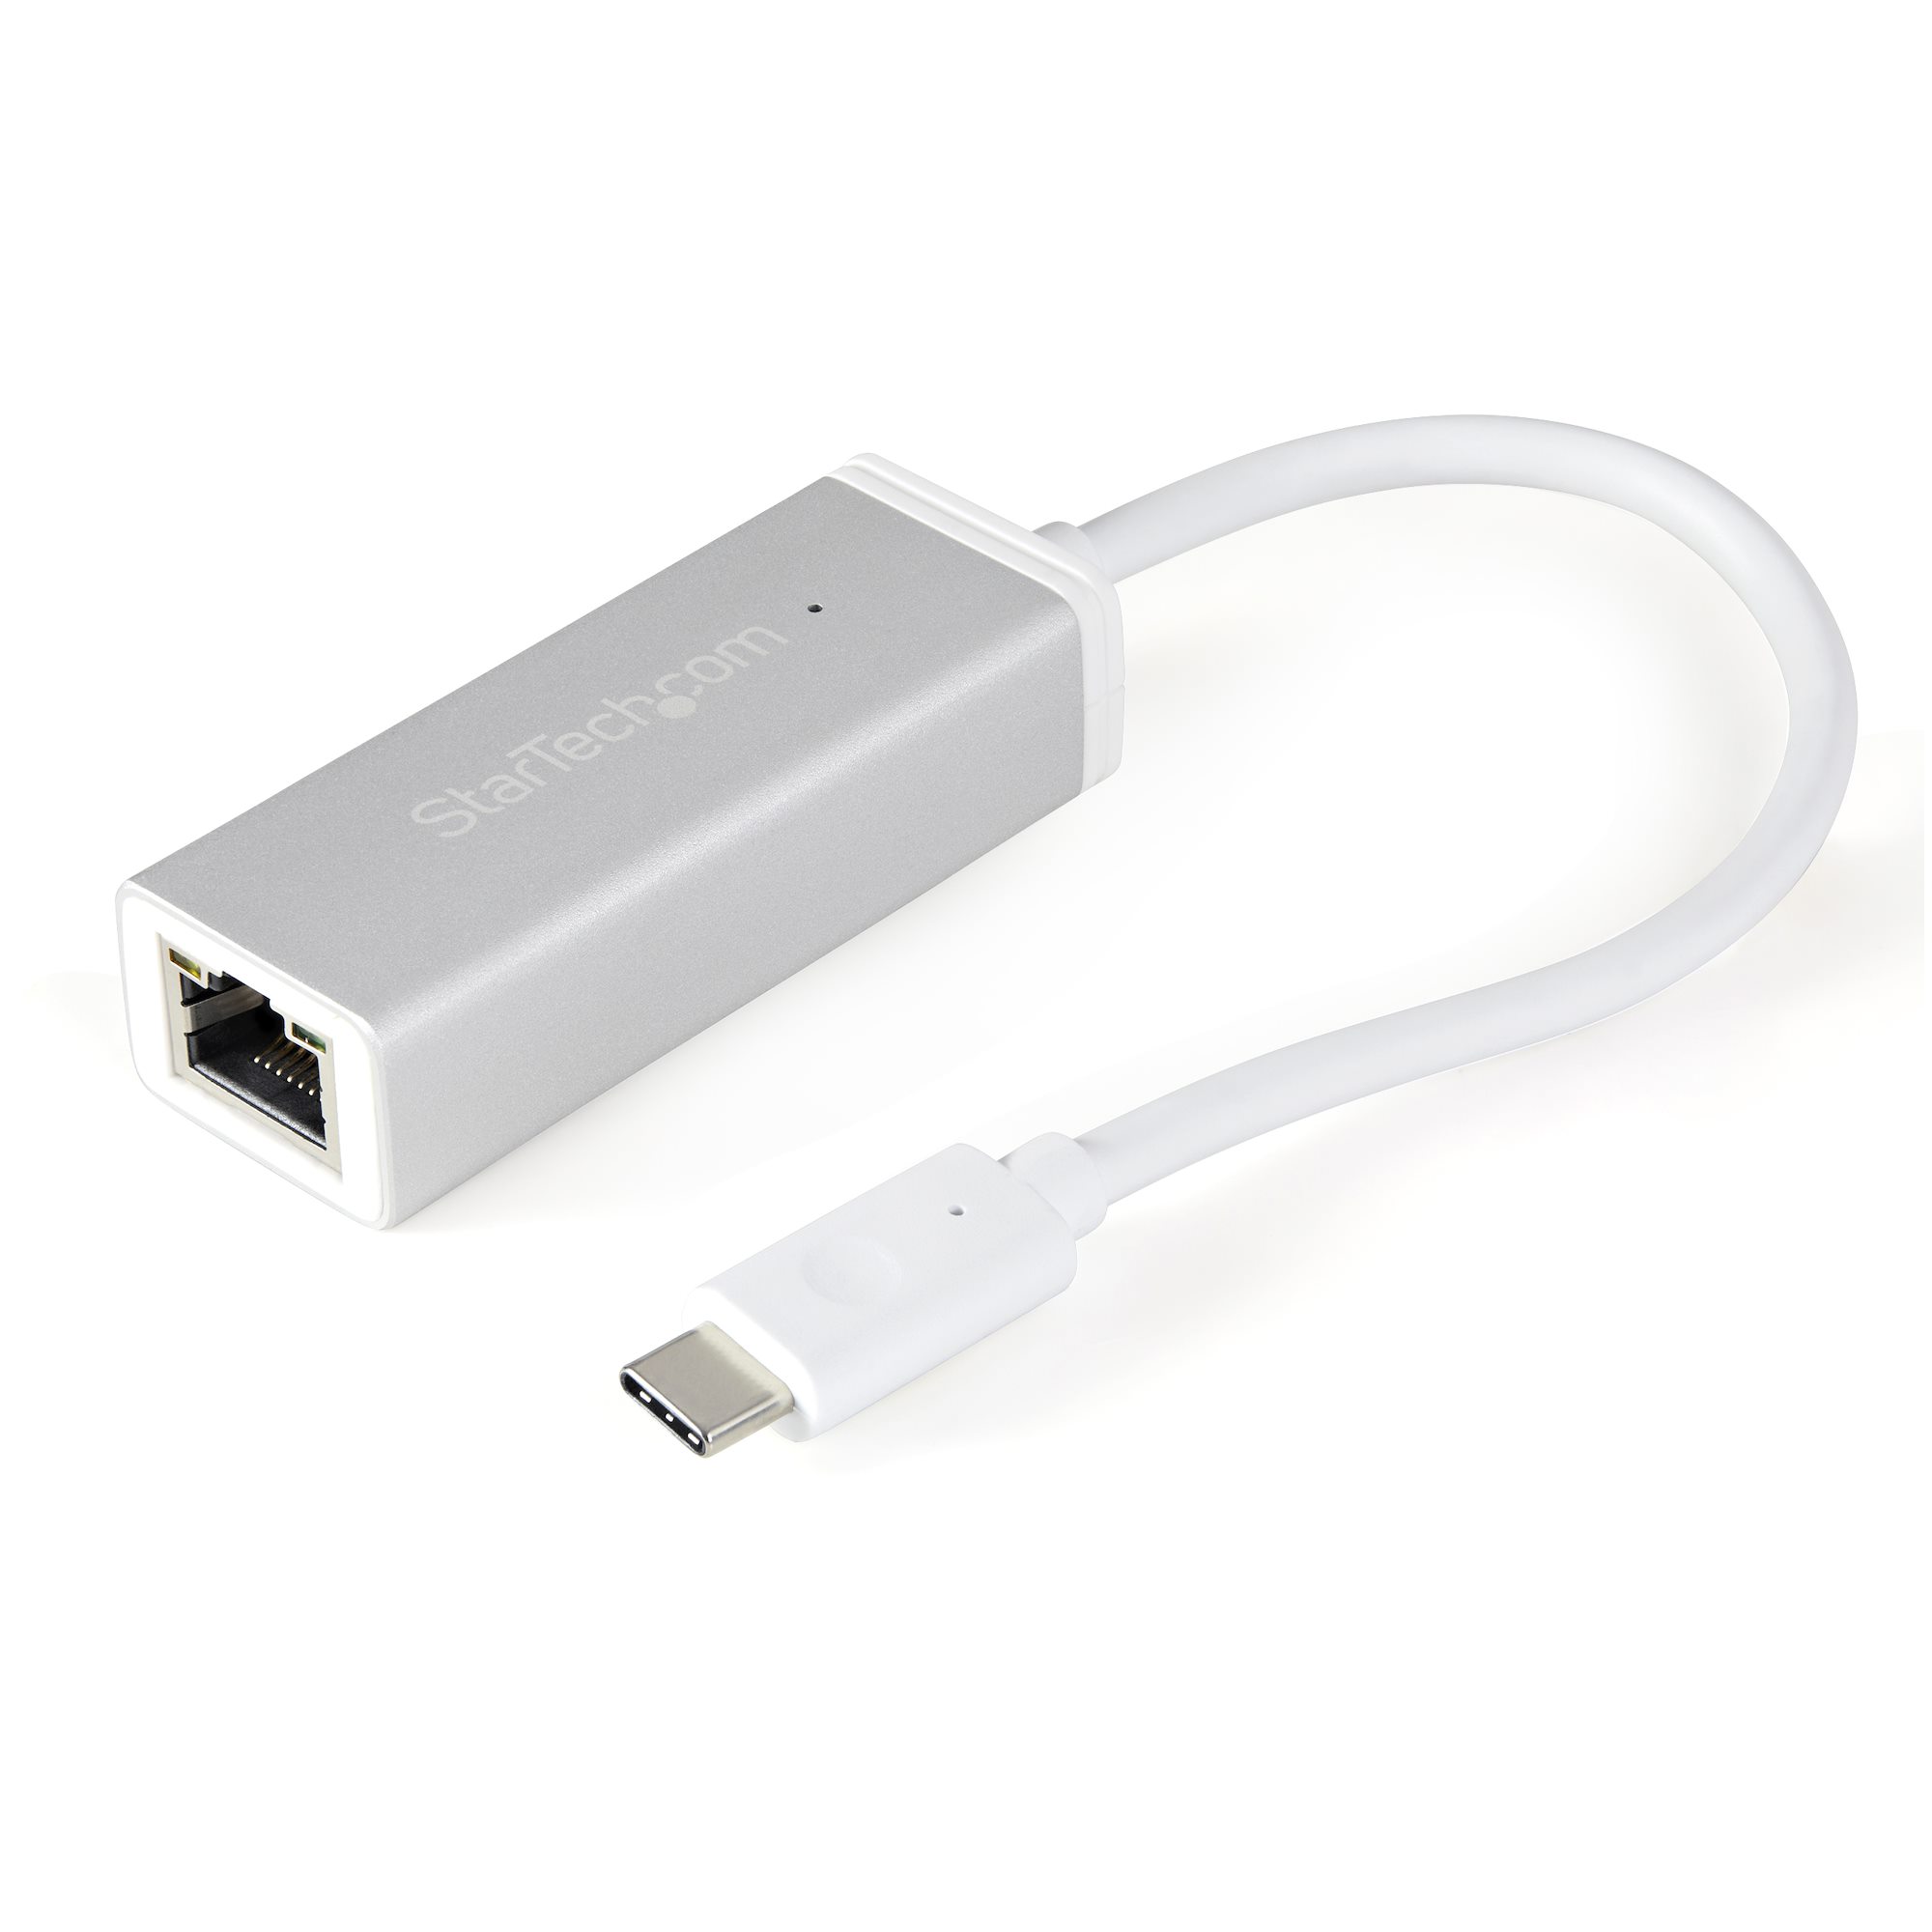 【US1GC30A】USB-C TO GIGABIT NETWORK ADAPTER